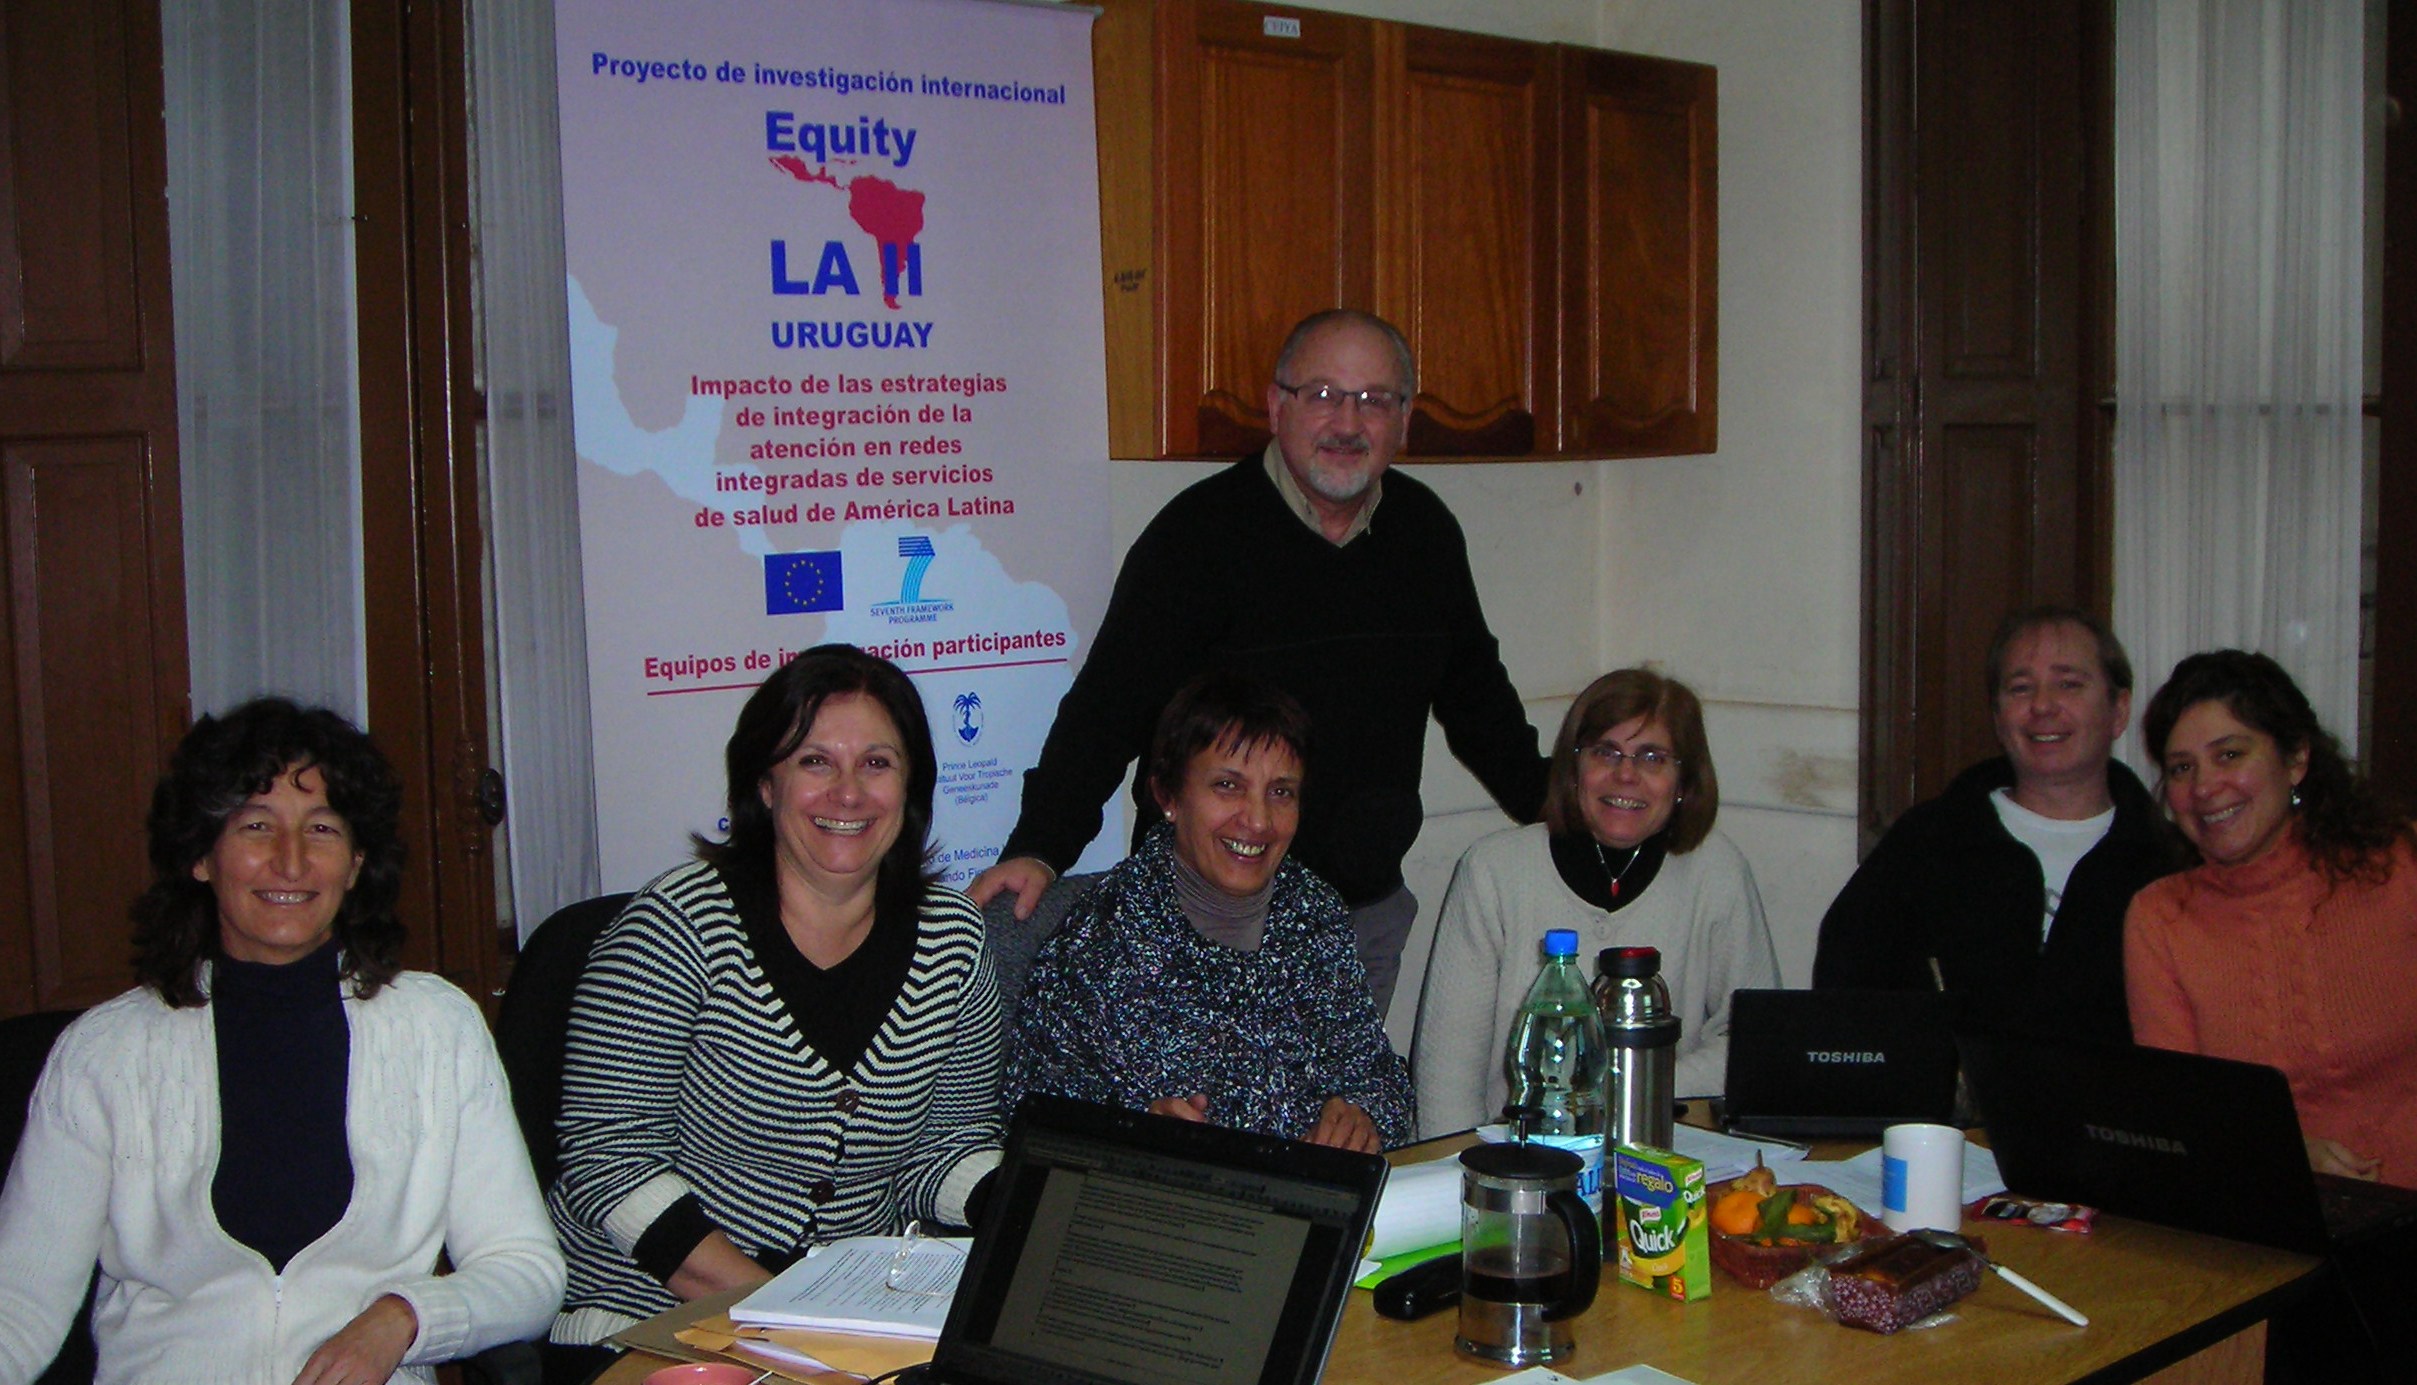 Public launch of the project in Uruguay 